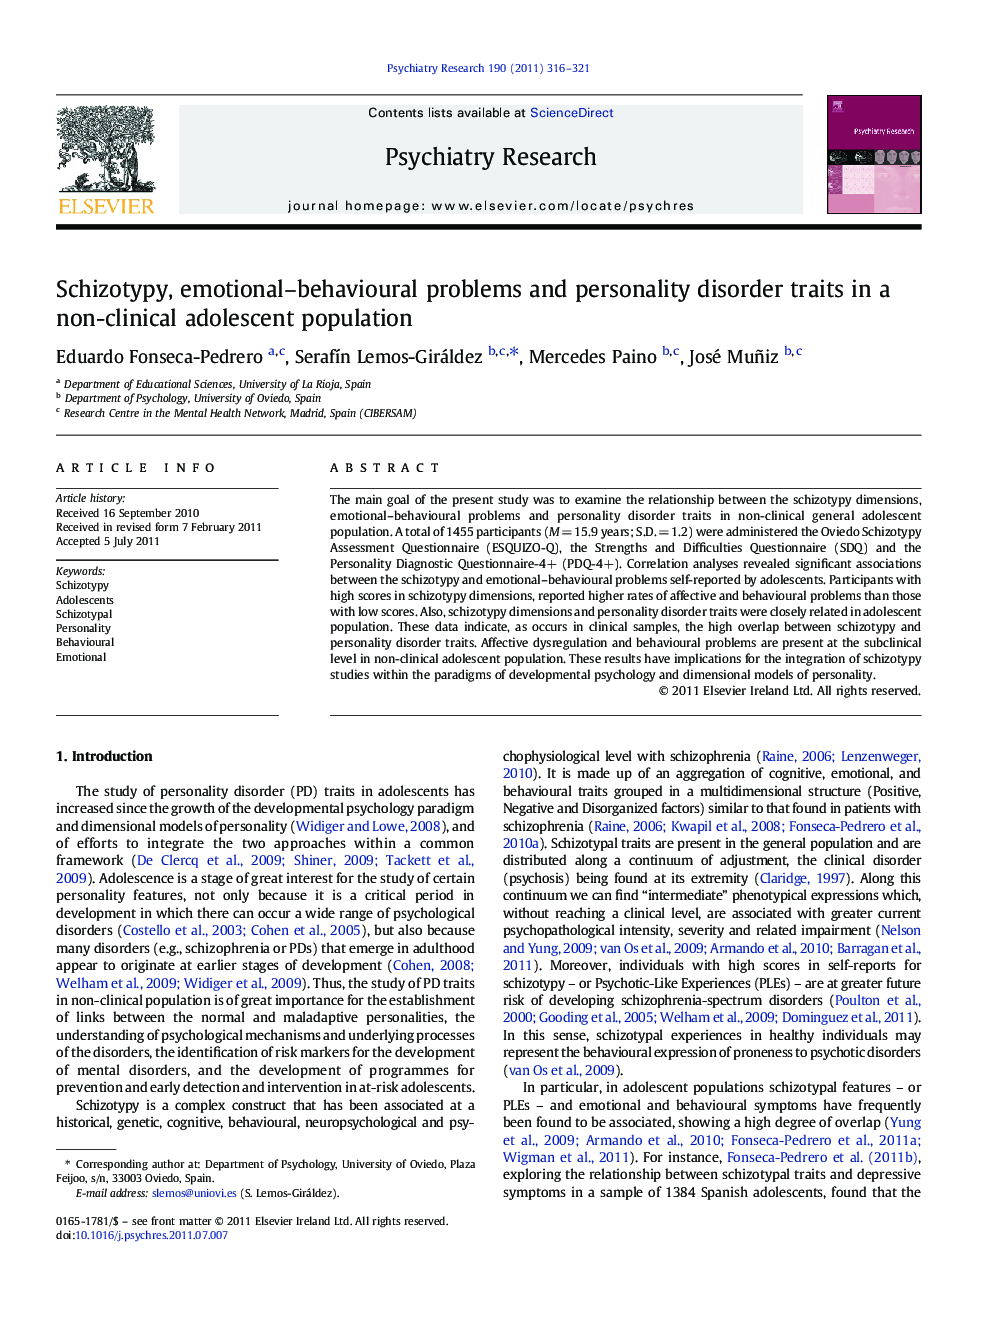 Schizotypy, emotional-behavioural problems and personality disorder traits in a non-clinical adolescent population